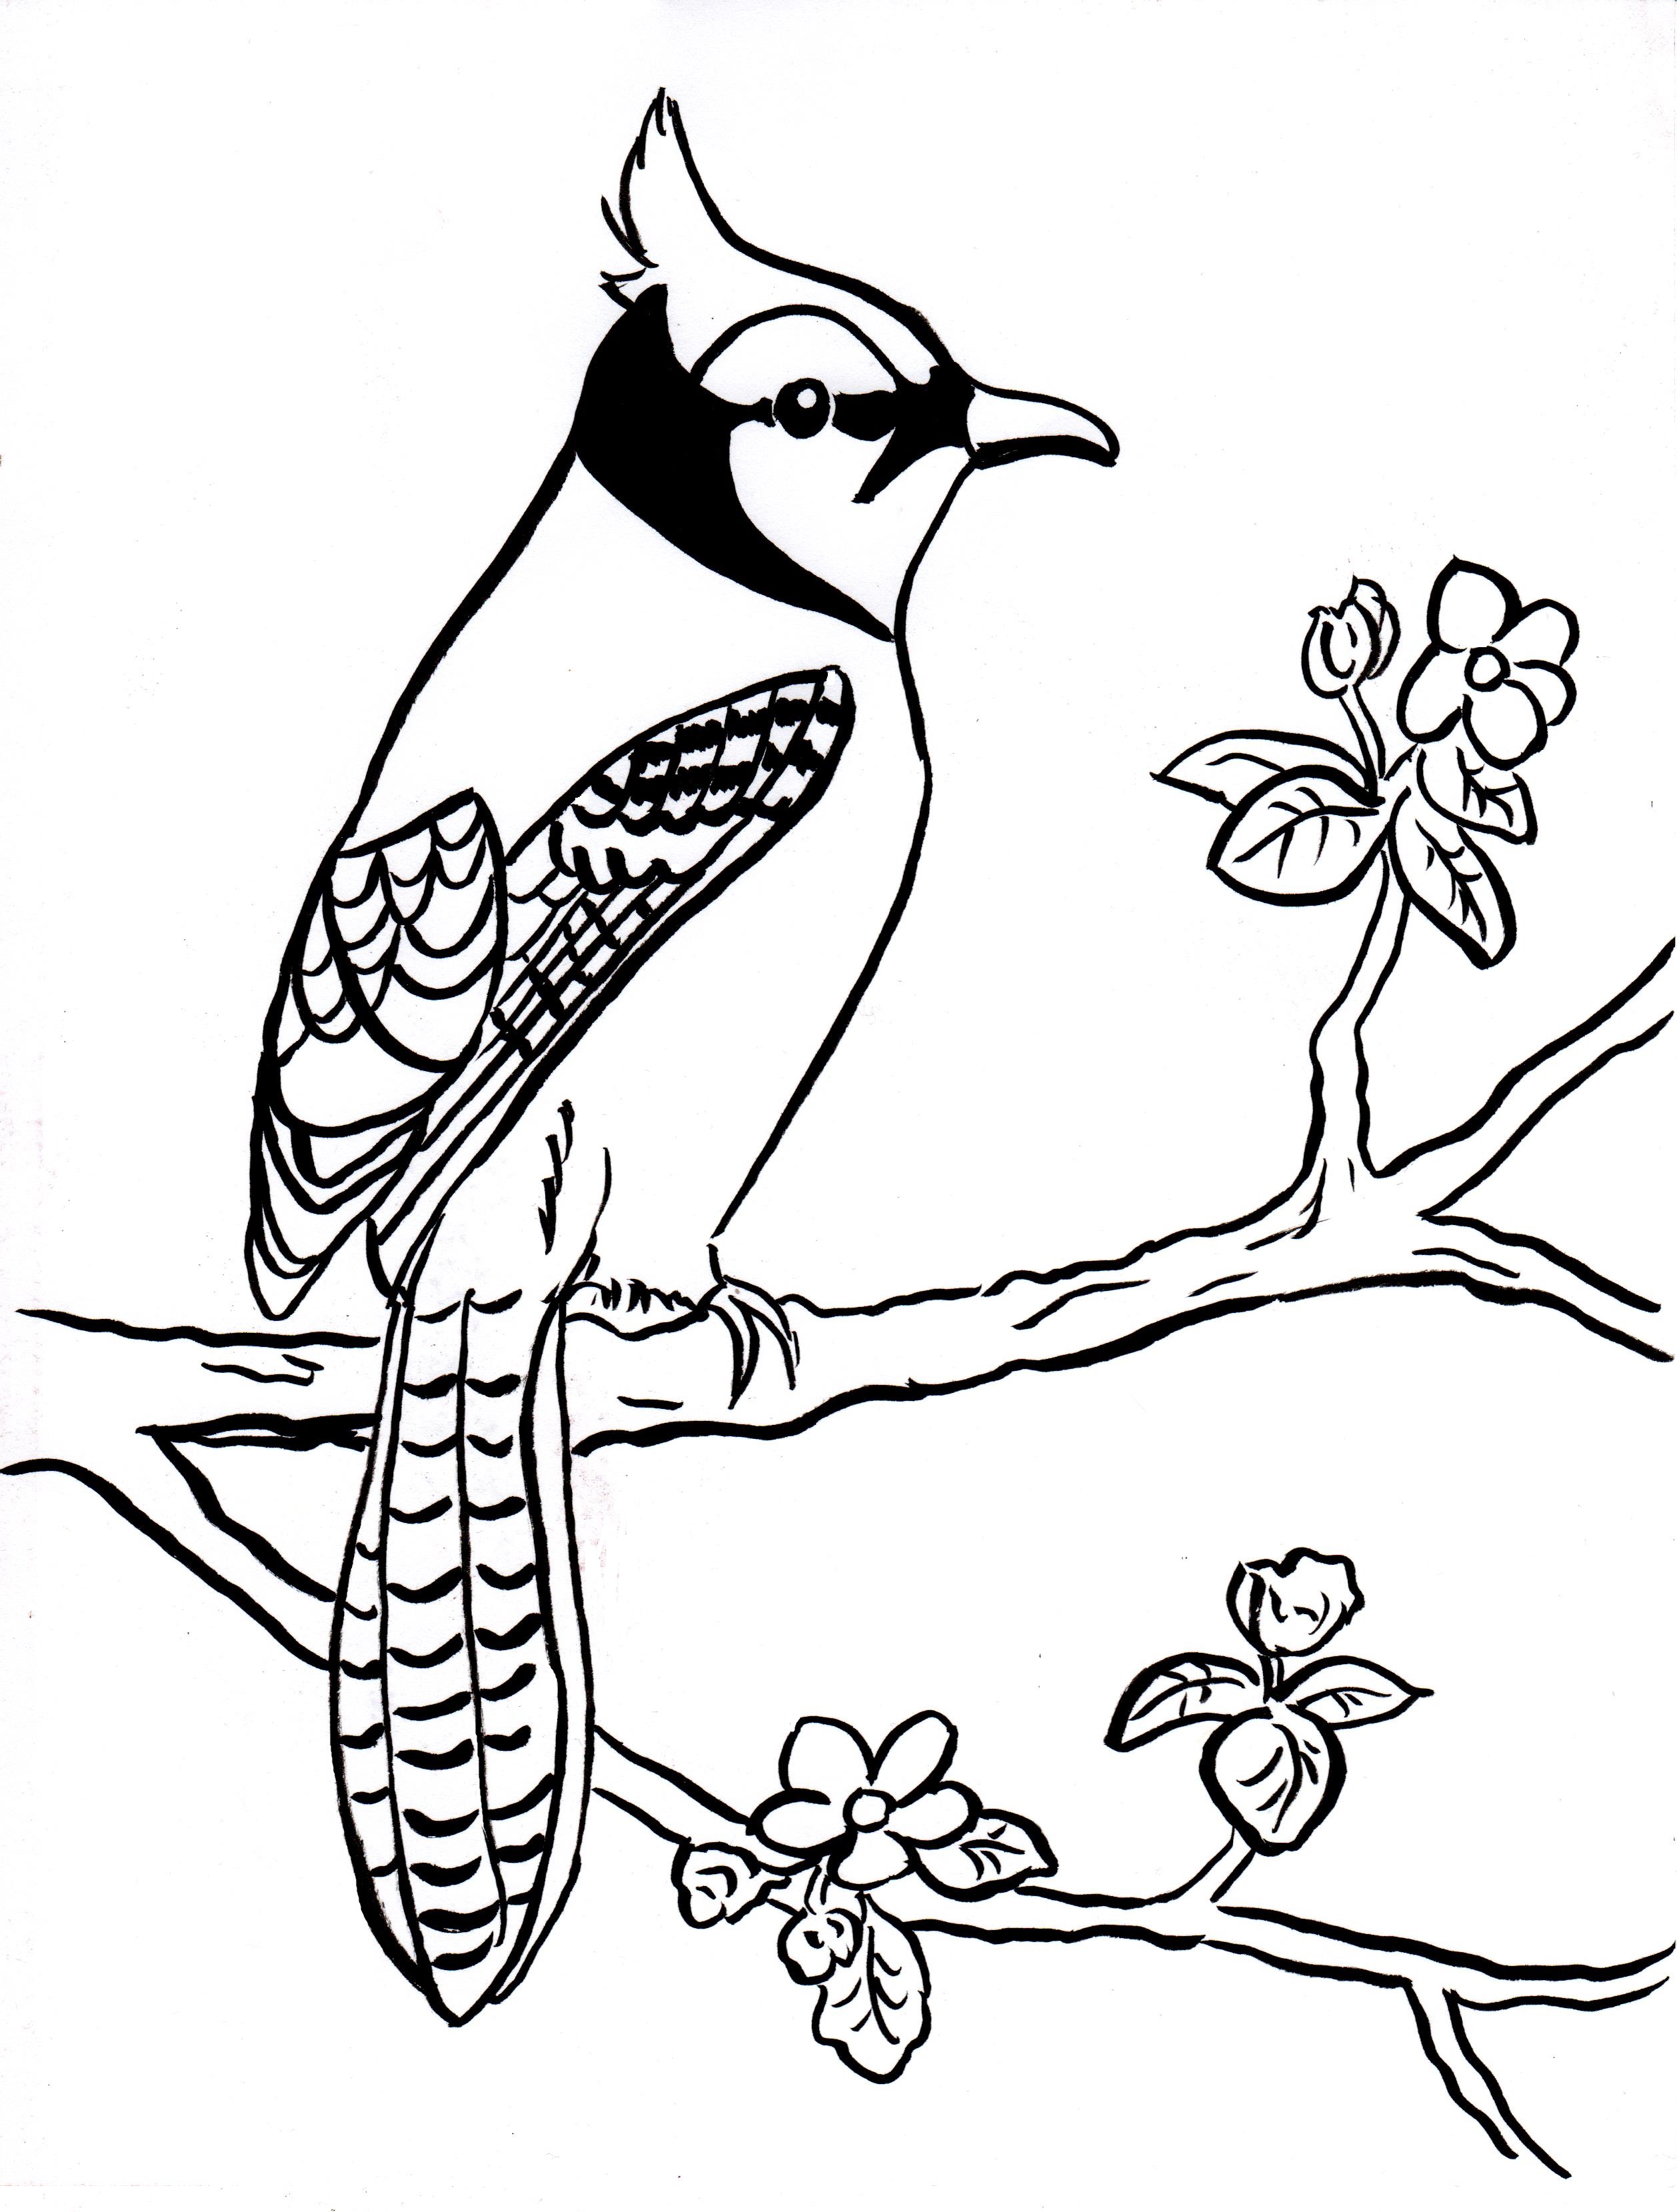 Blue Jay Coloring Page - Samantha Bell